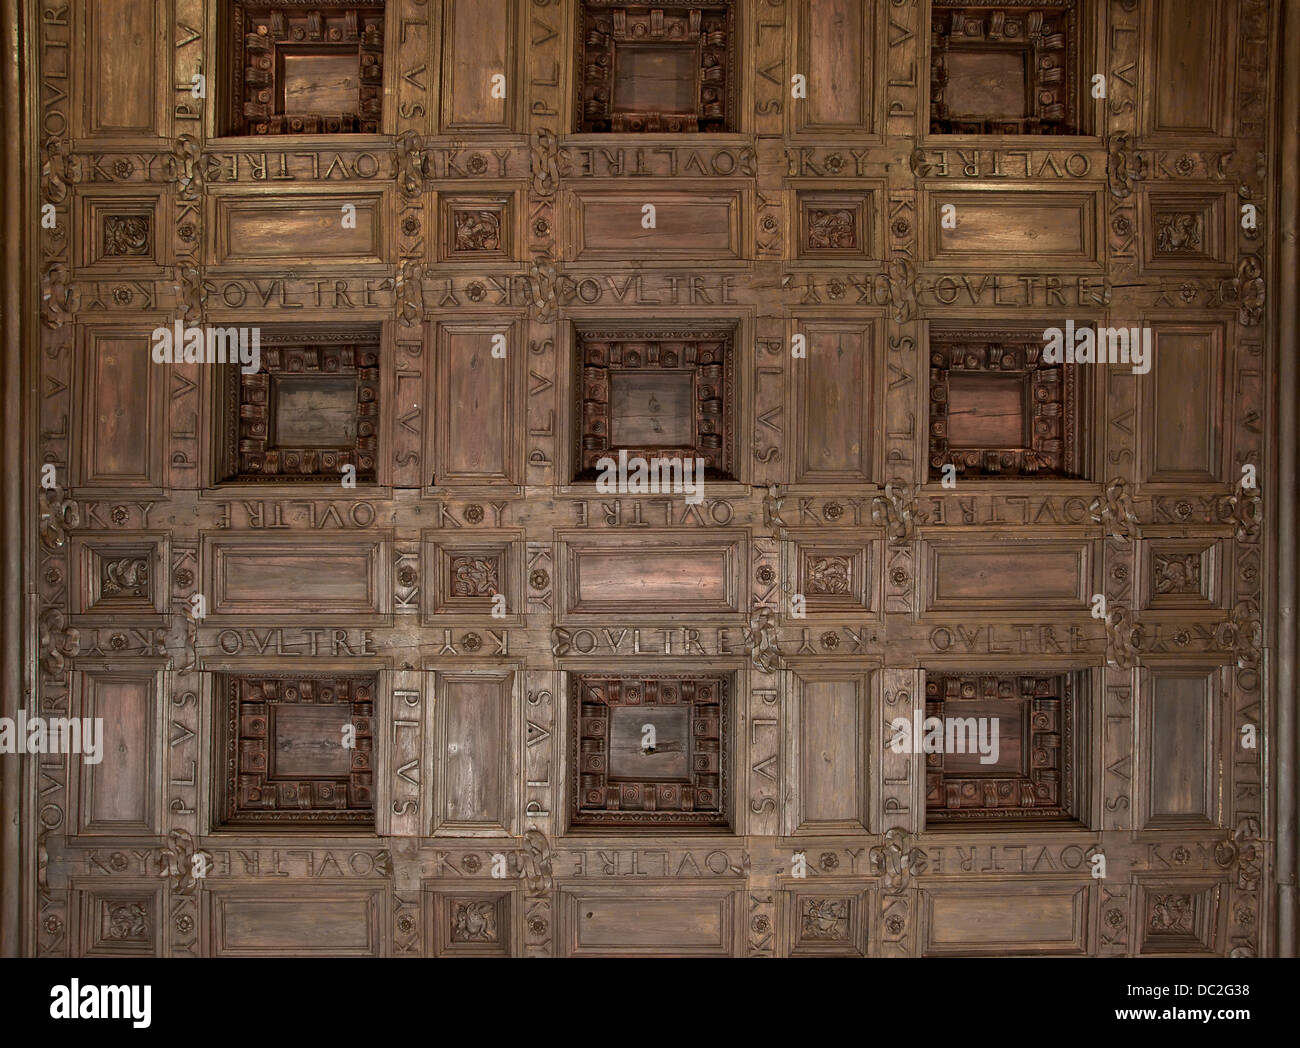 Part of a coffered wooden ceiling in the 'Emperors Chamber' of Alhambra of Granada, Spain. It shows the motto 'Plus Oultre' of Stock Photo